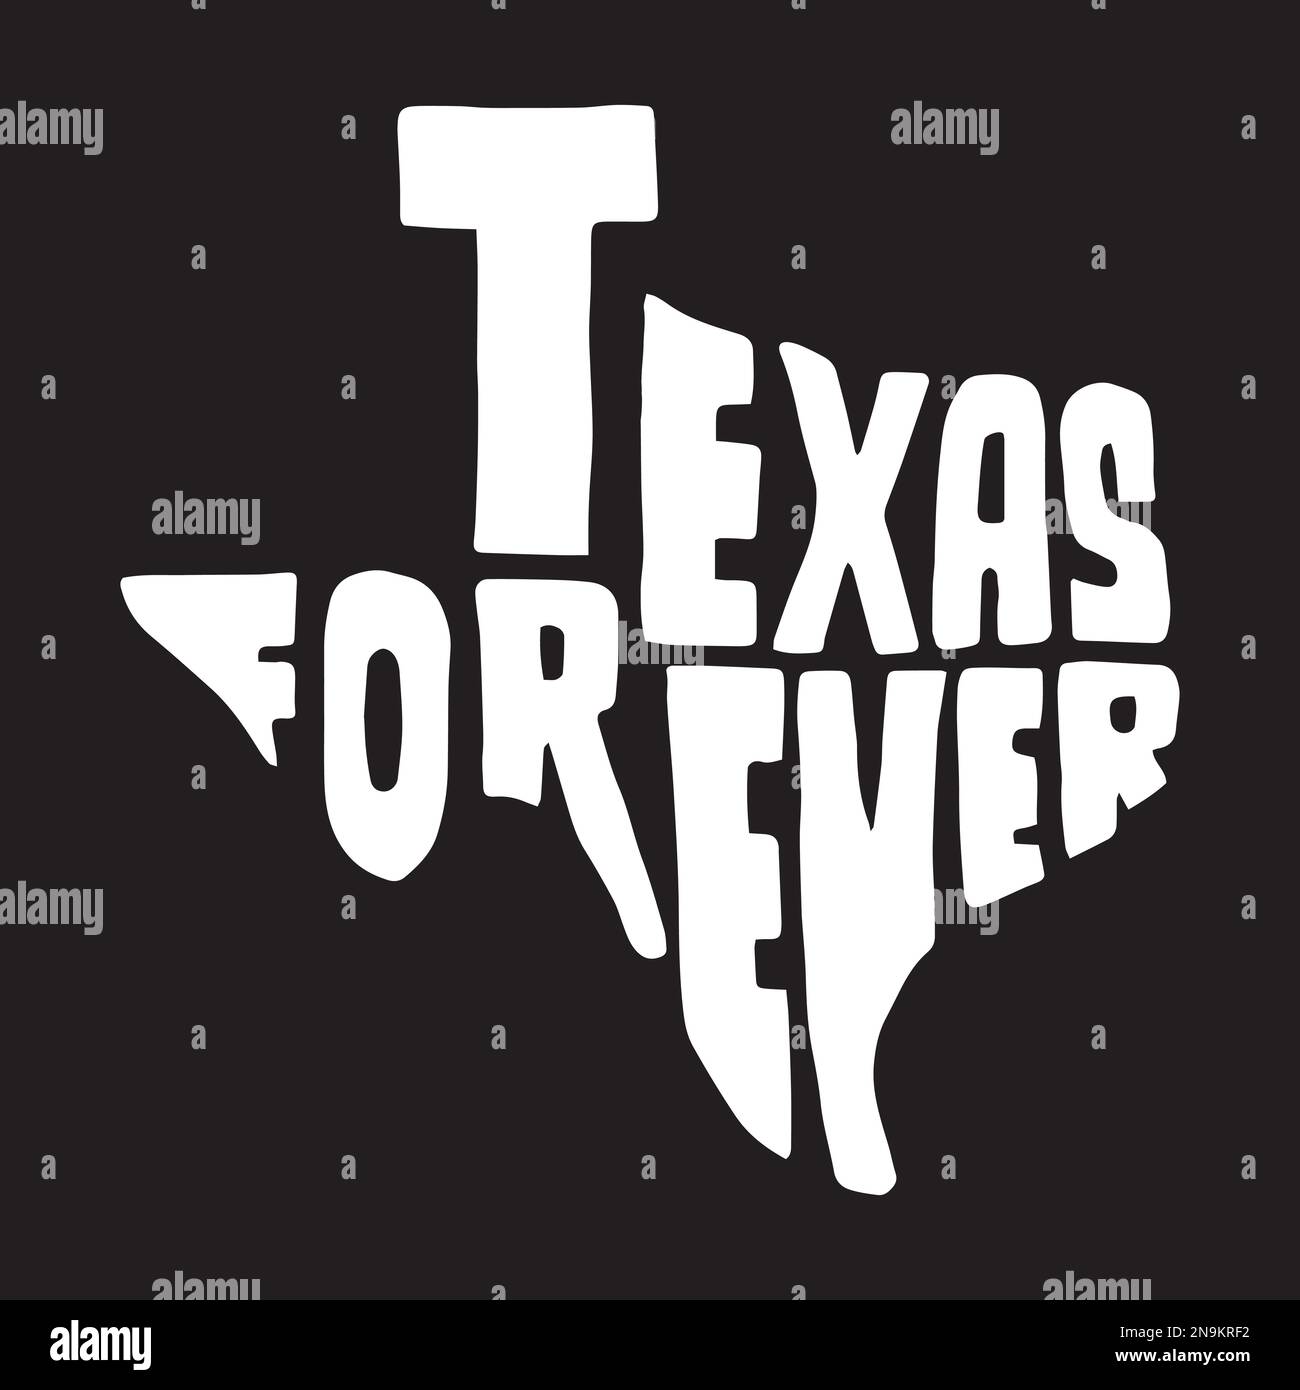 Texas forever typography design in Texas map shape. Stock Vector